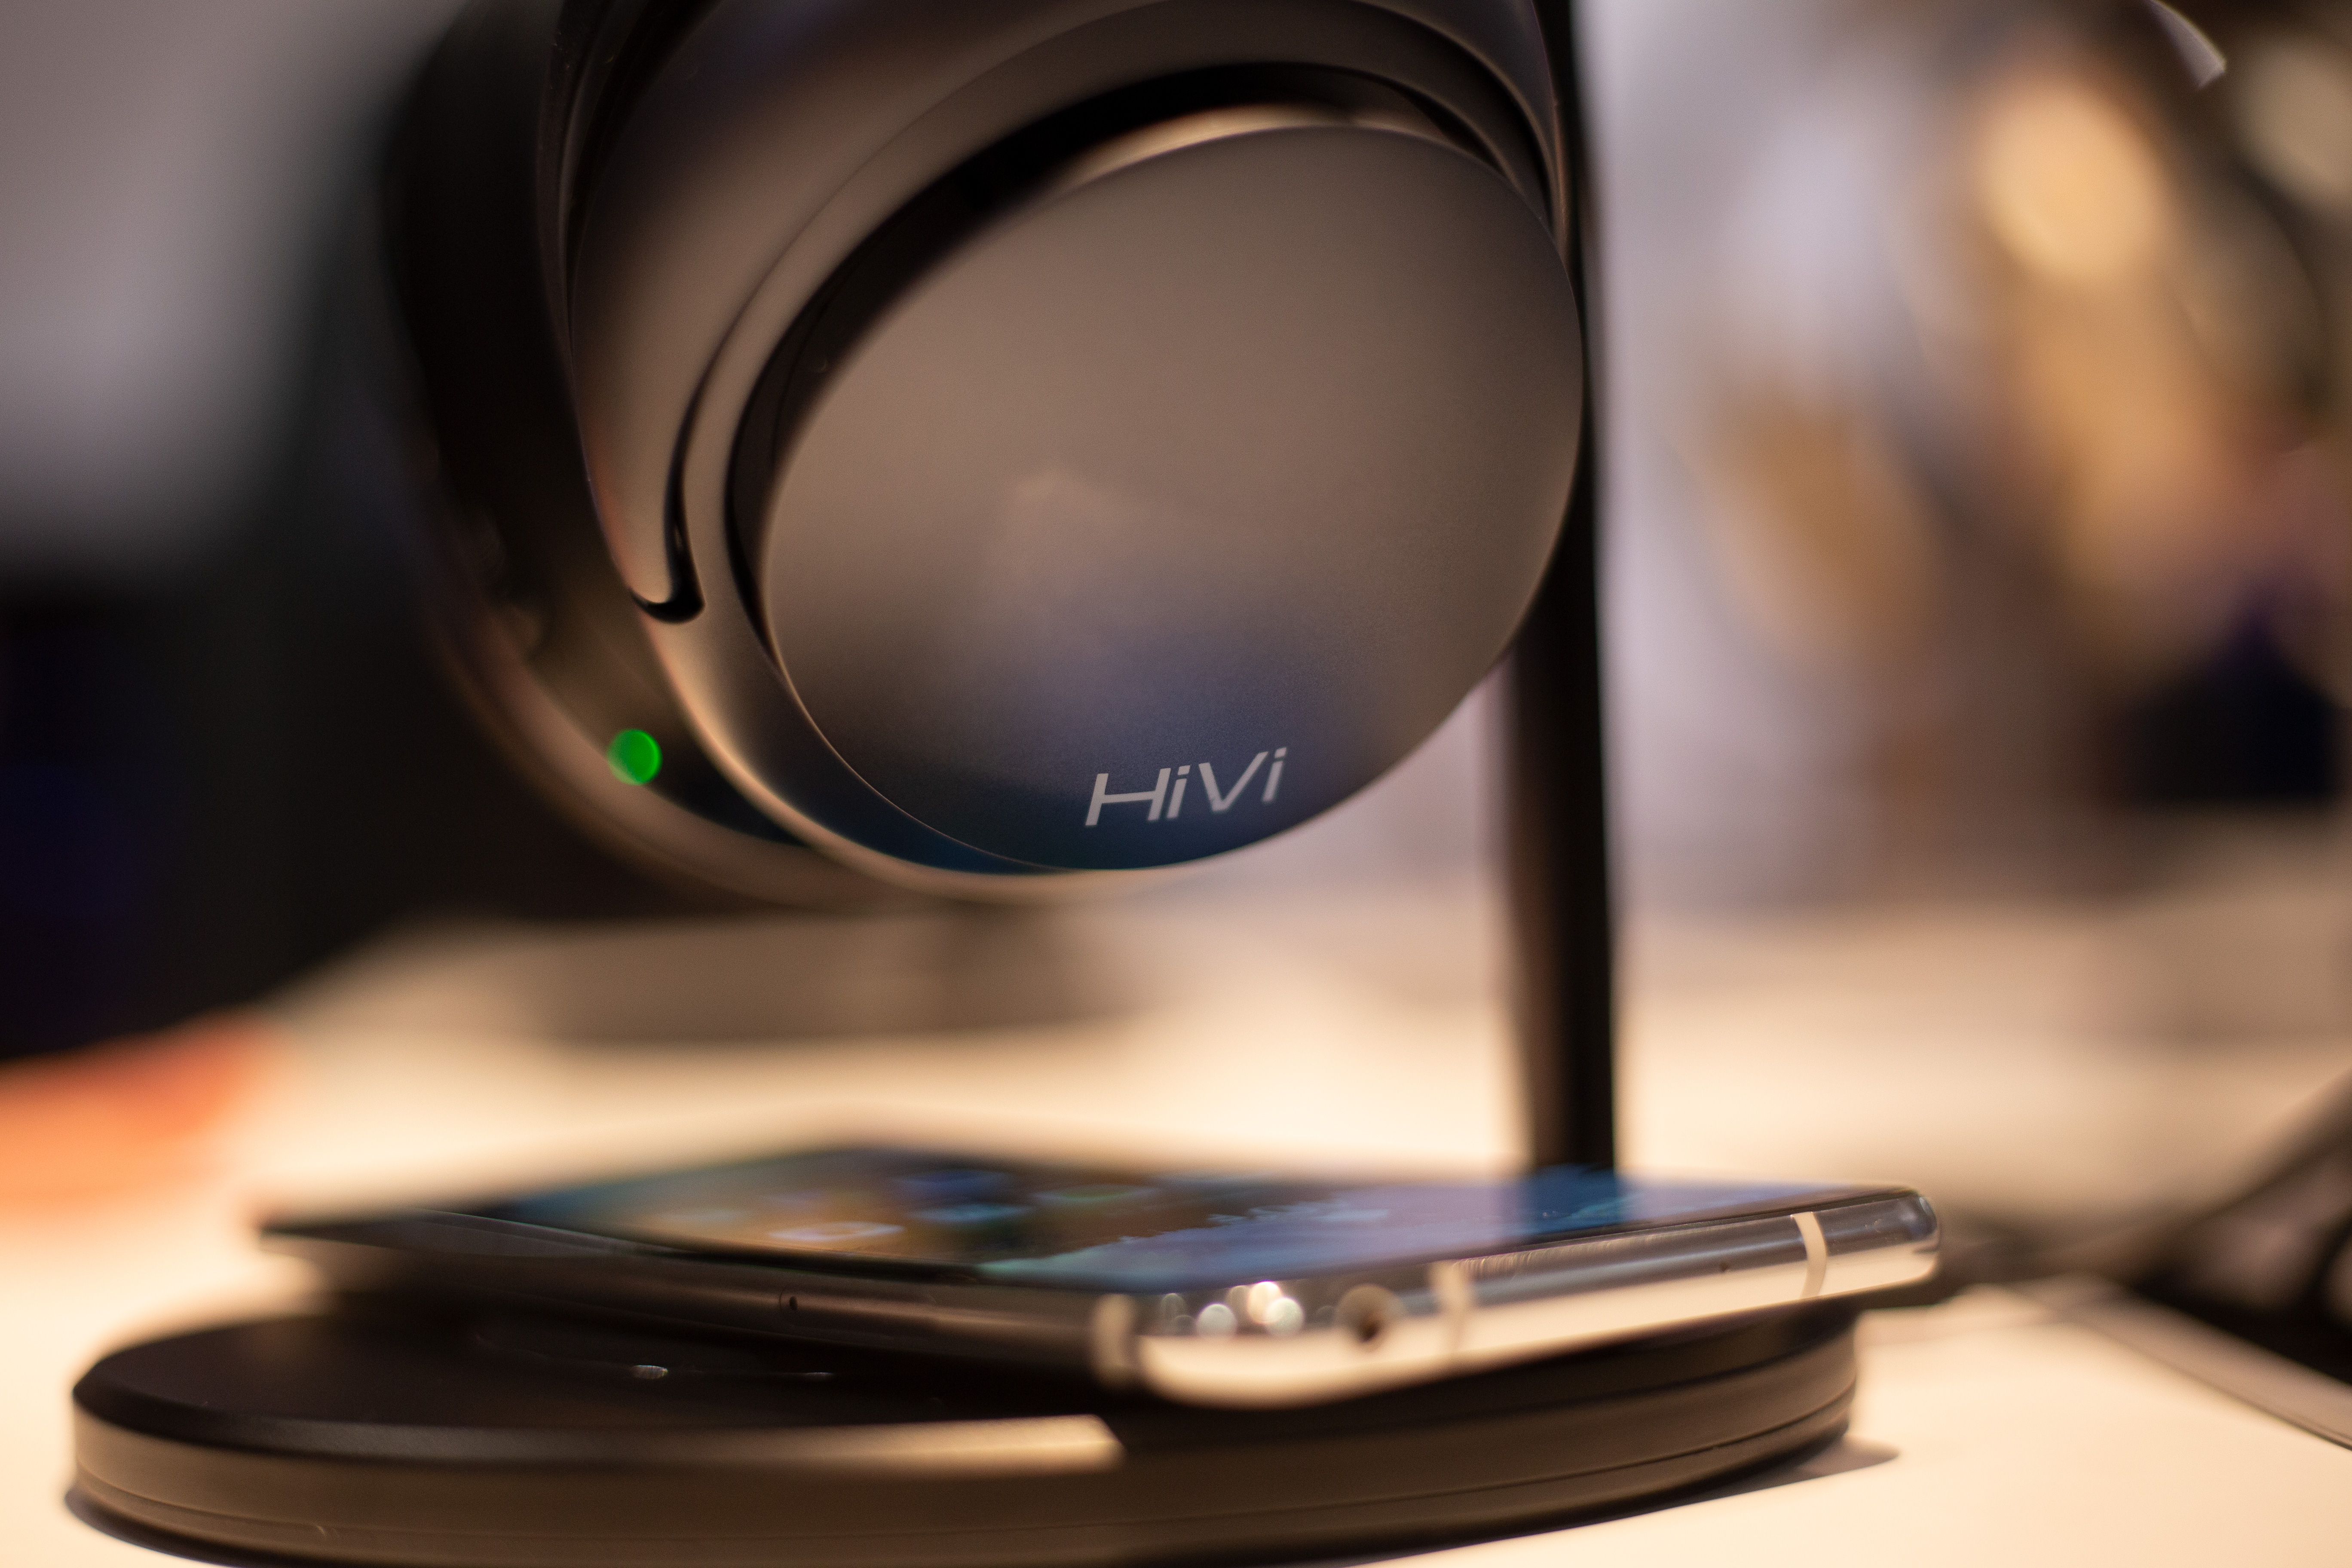 hivi aw 85 headphones wireless charger ces 2019 1